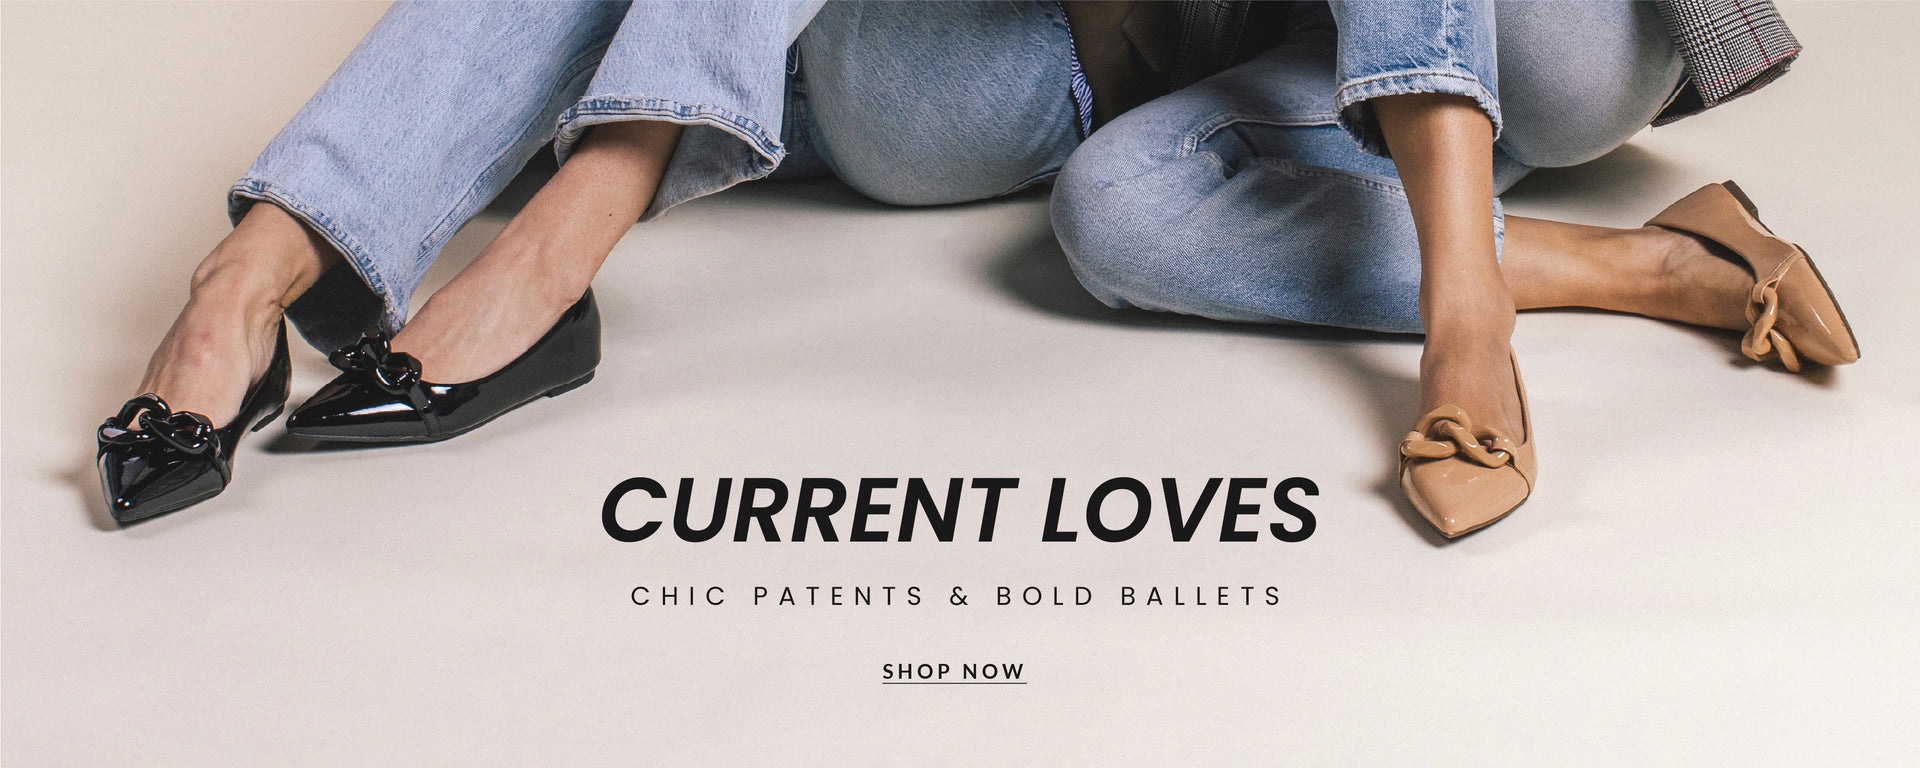 "Current loves" promotional banner featuring two models in tapered jeans with pointed toe ballet flats. Call to action: shop now.